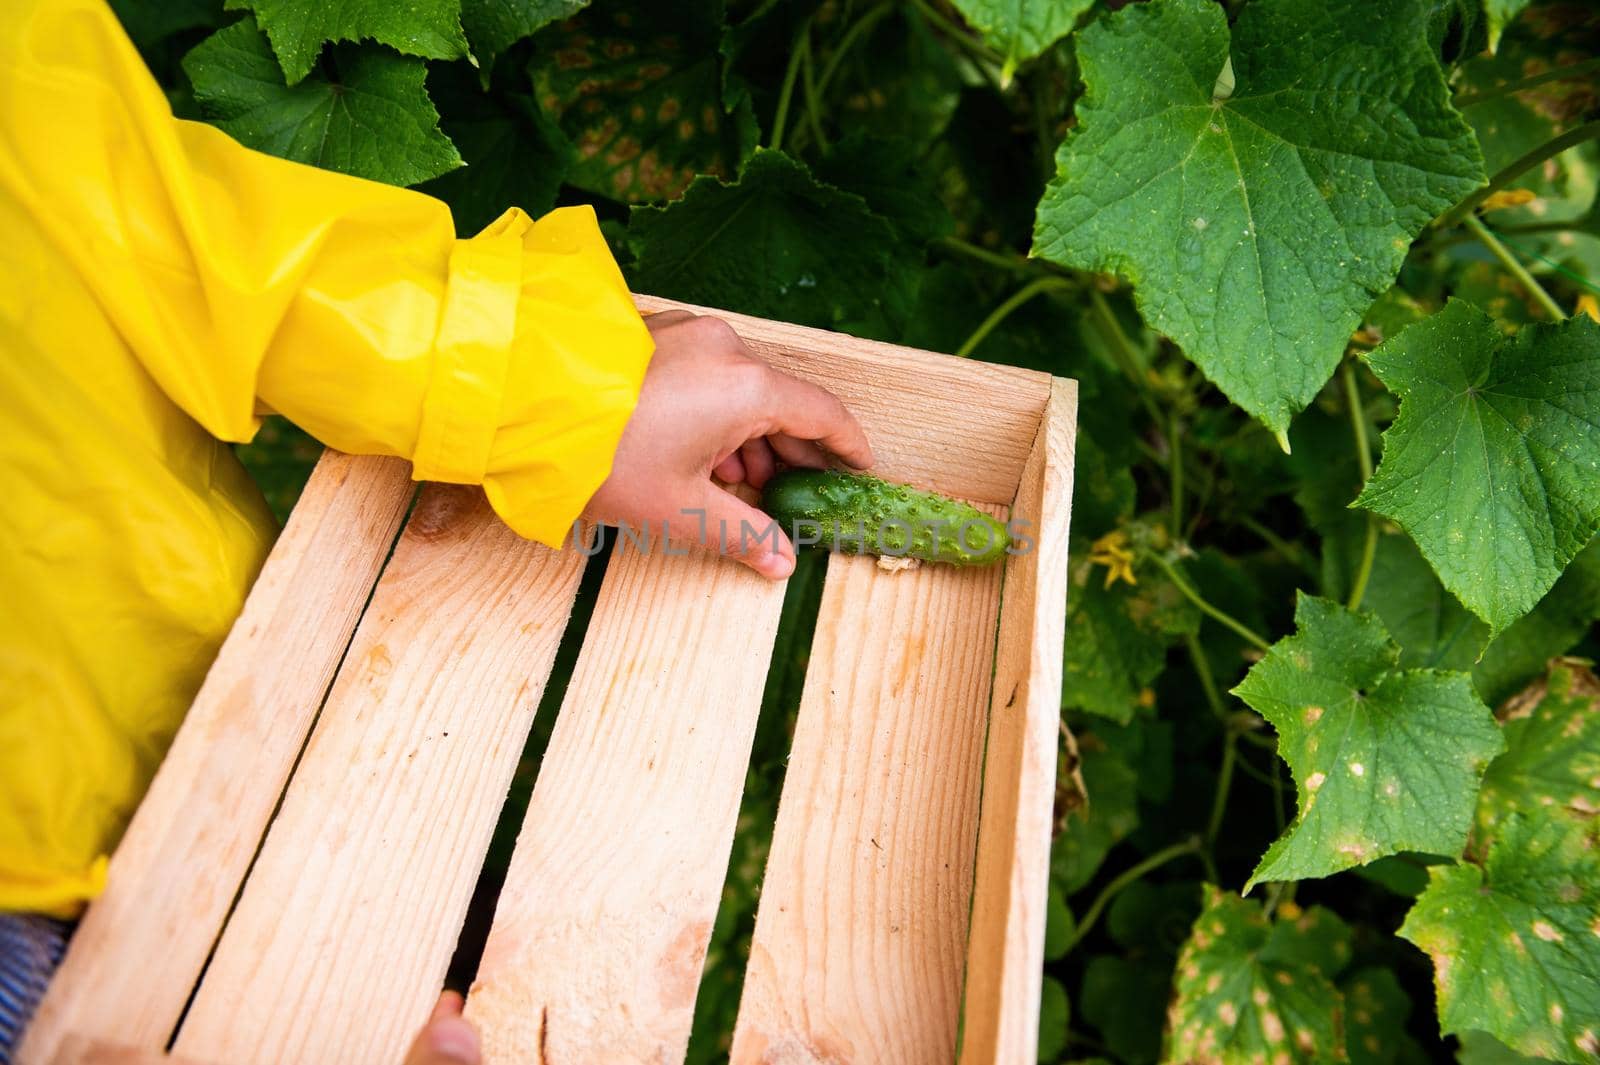 Details: Gardener's hand putting harvested cucumber cultivated in an organic eco farm into a wooden box. Cultivation of ecologically friendly vegetable. Growing homegrown products and harvesting crop